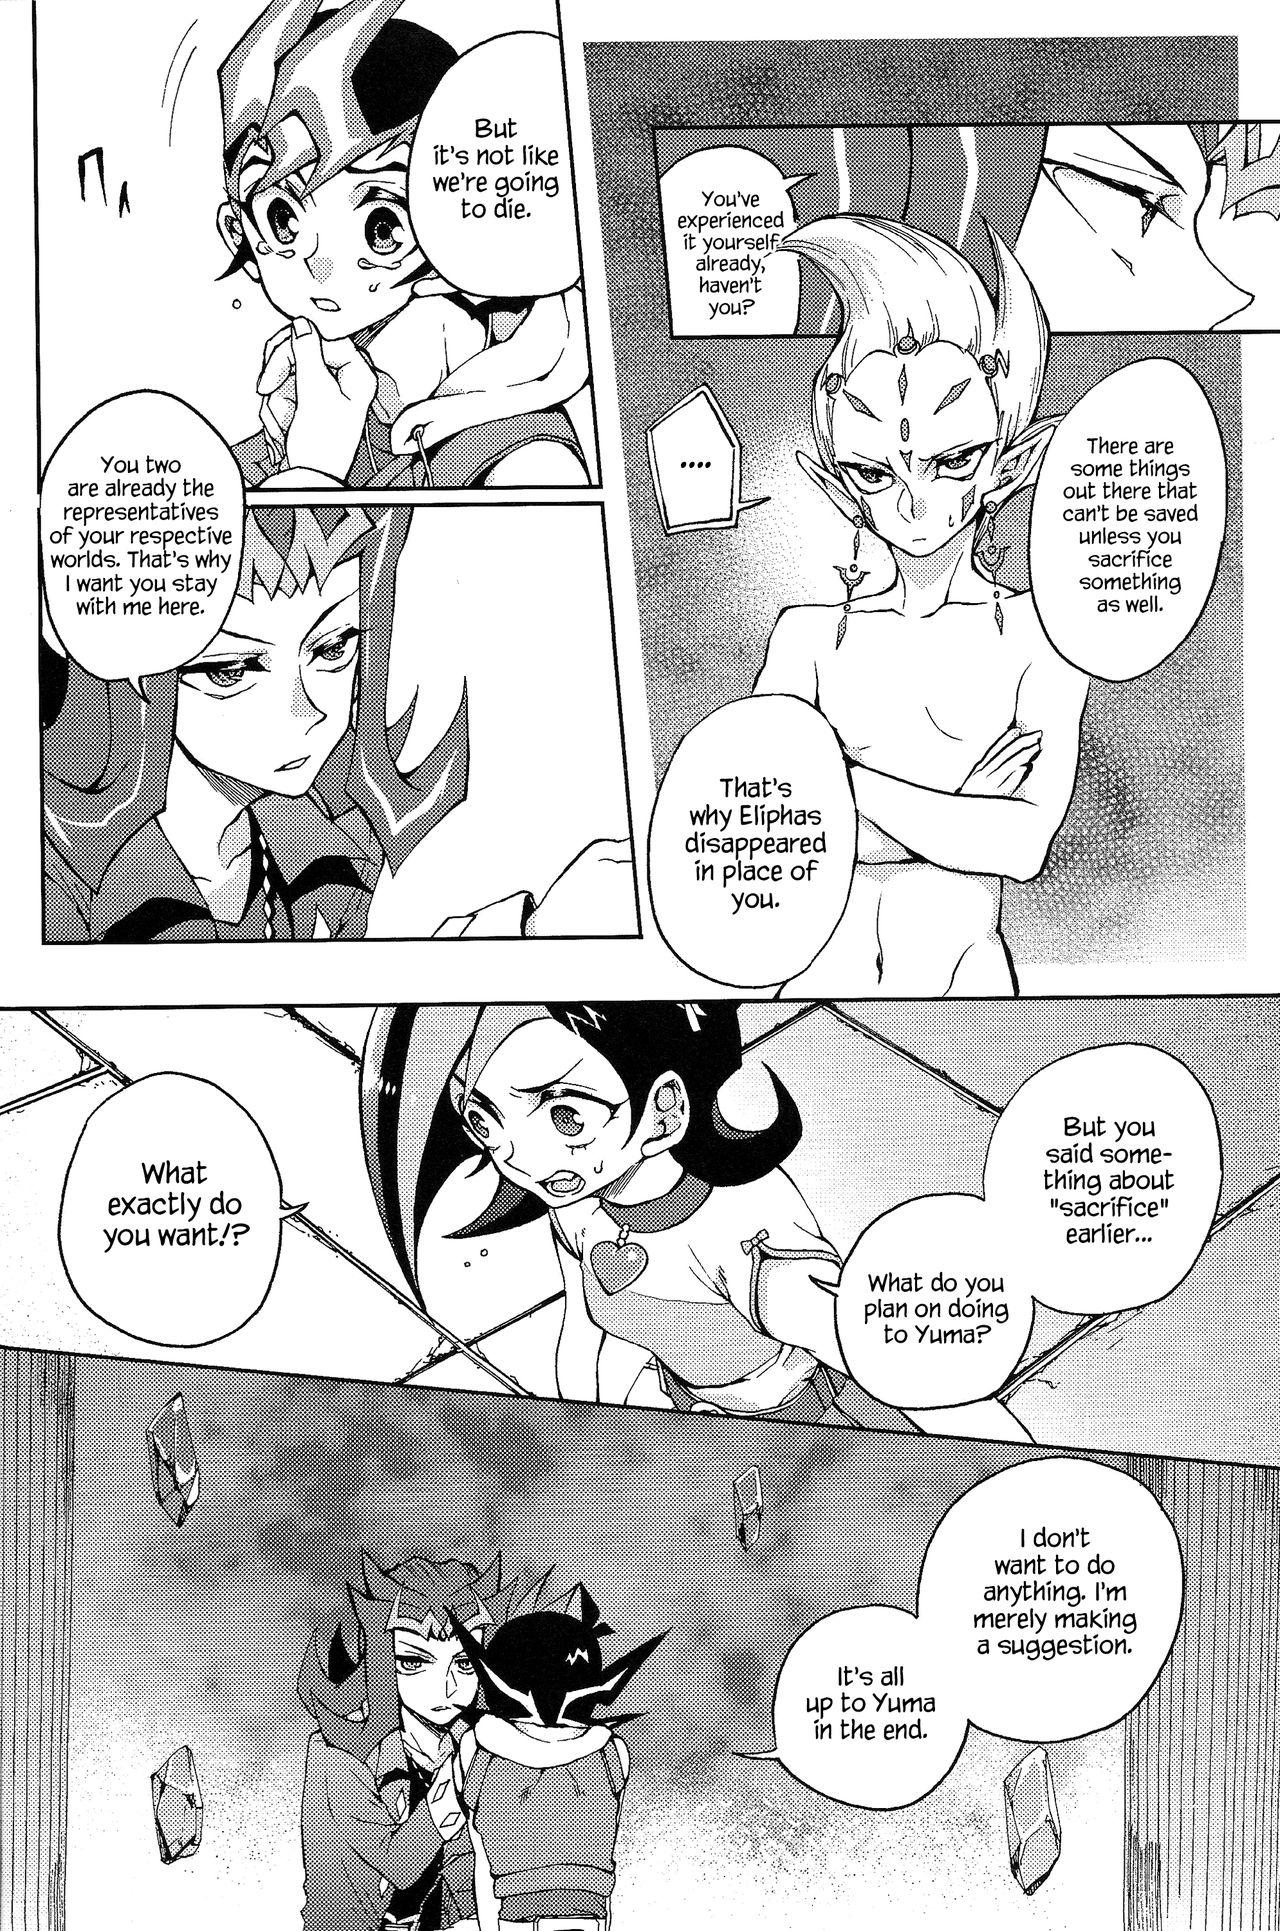 Funny Ultimate Eden - Yu gi oh zexal Pussylick - Page 11